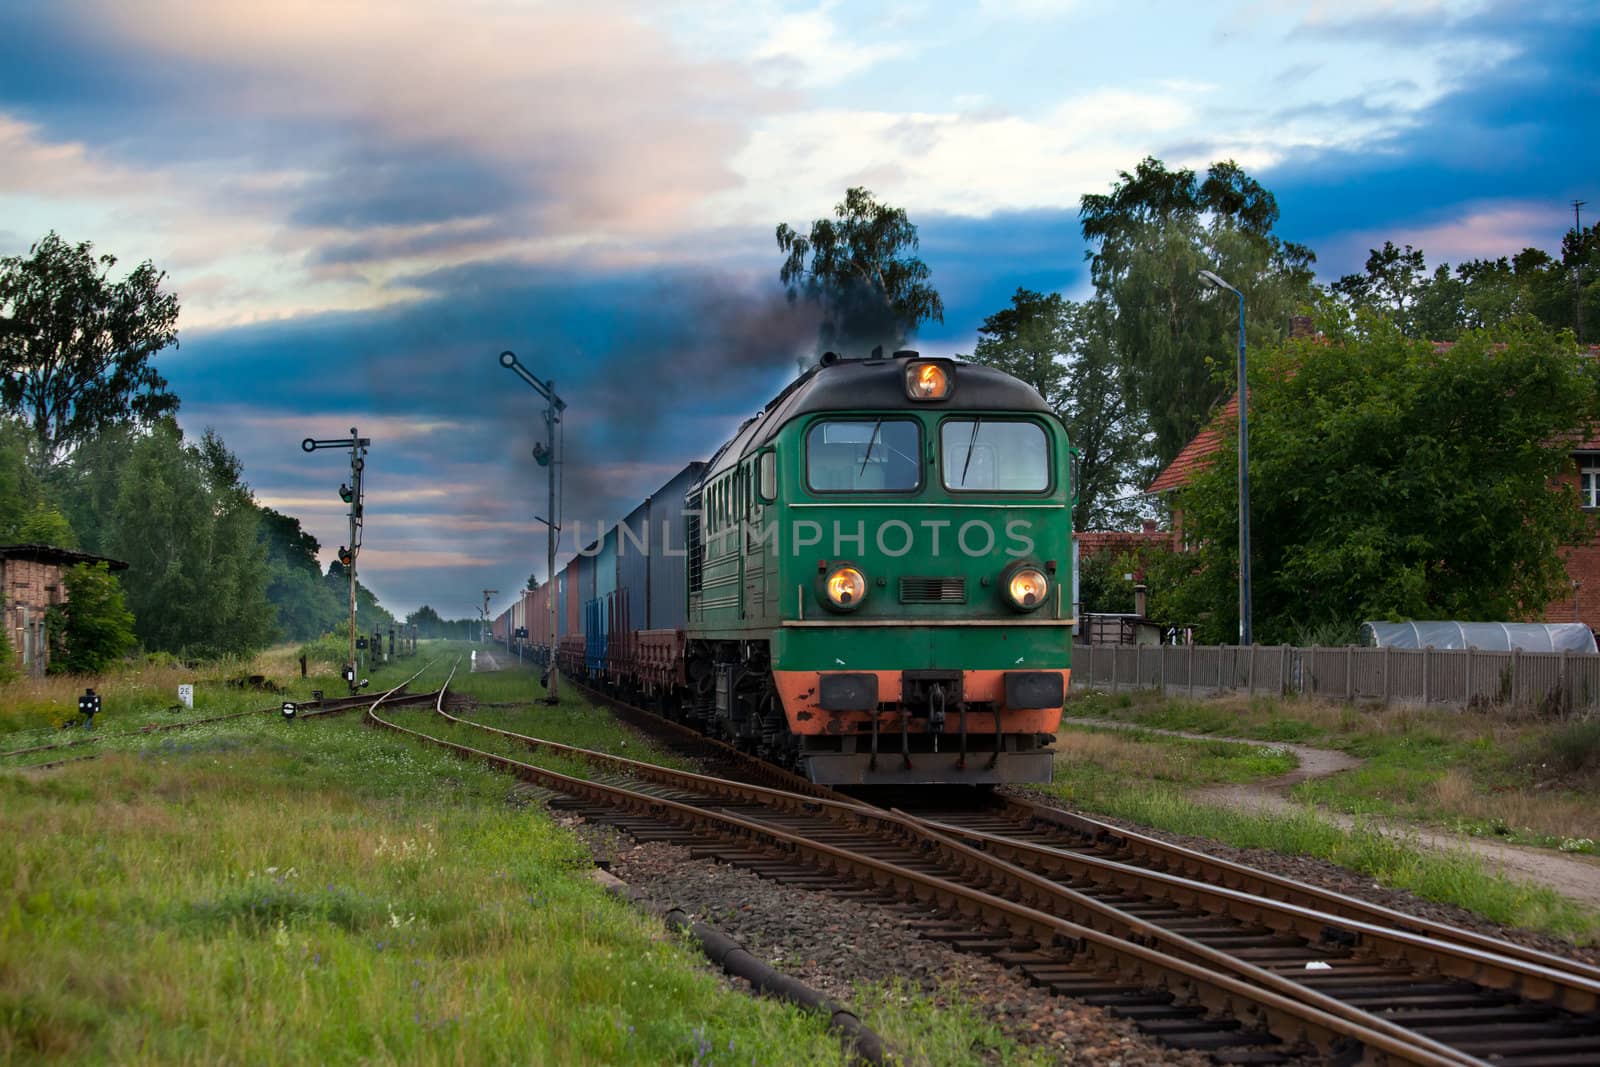 Freight train hauled by the diesel locomotive passing the station
